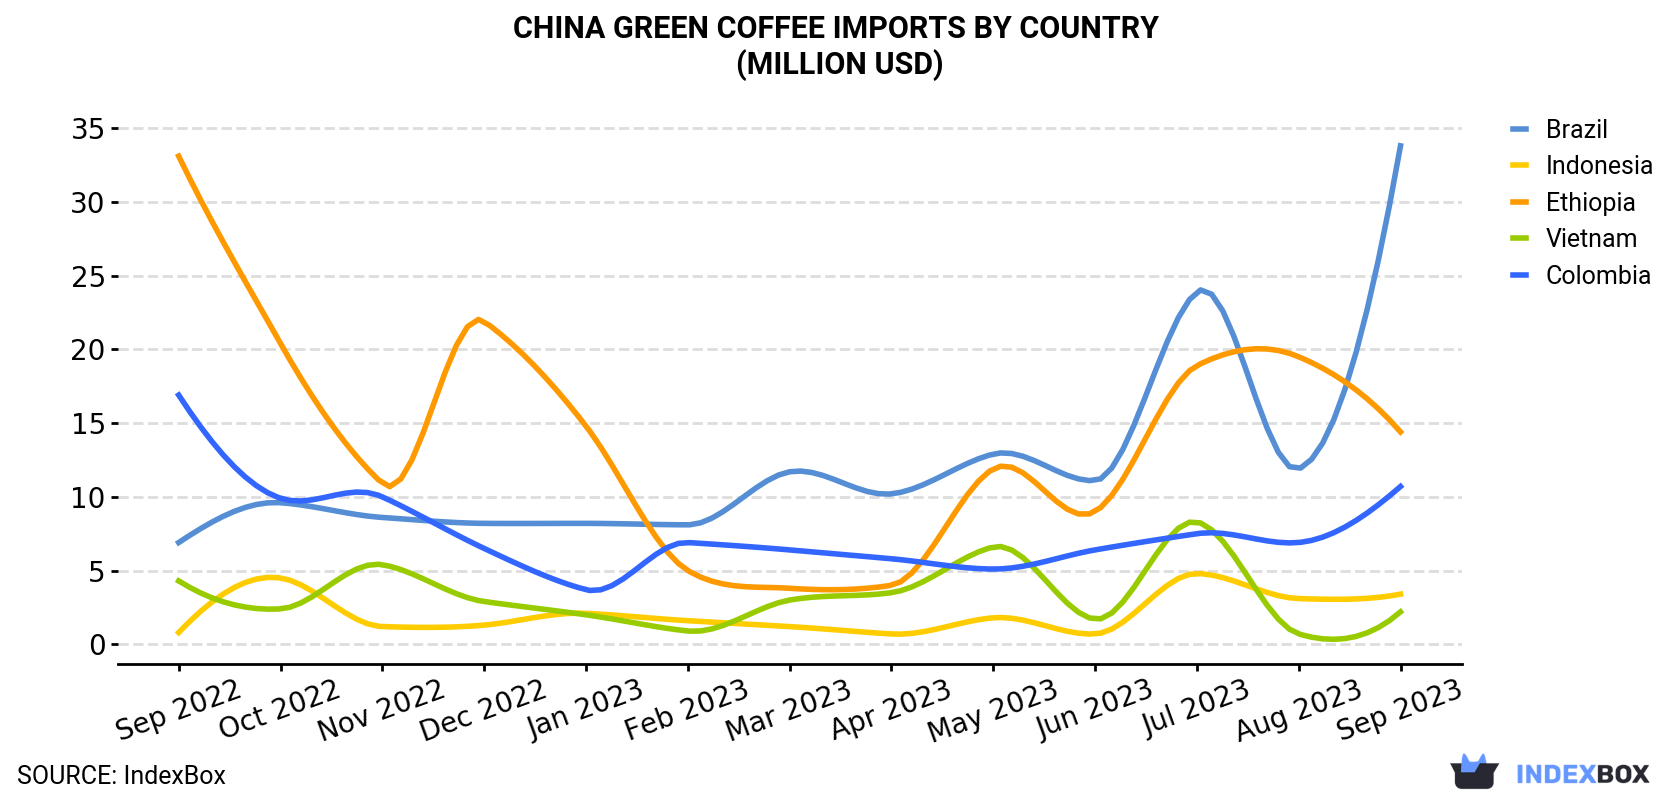 China Green Coffee Imports By Country (Million USD)